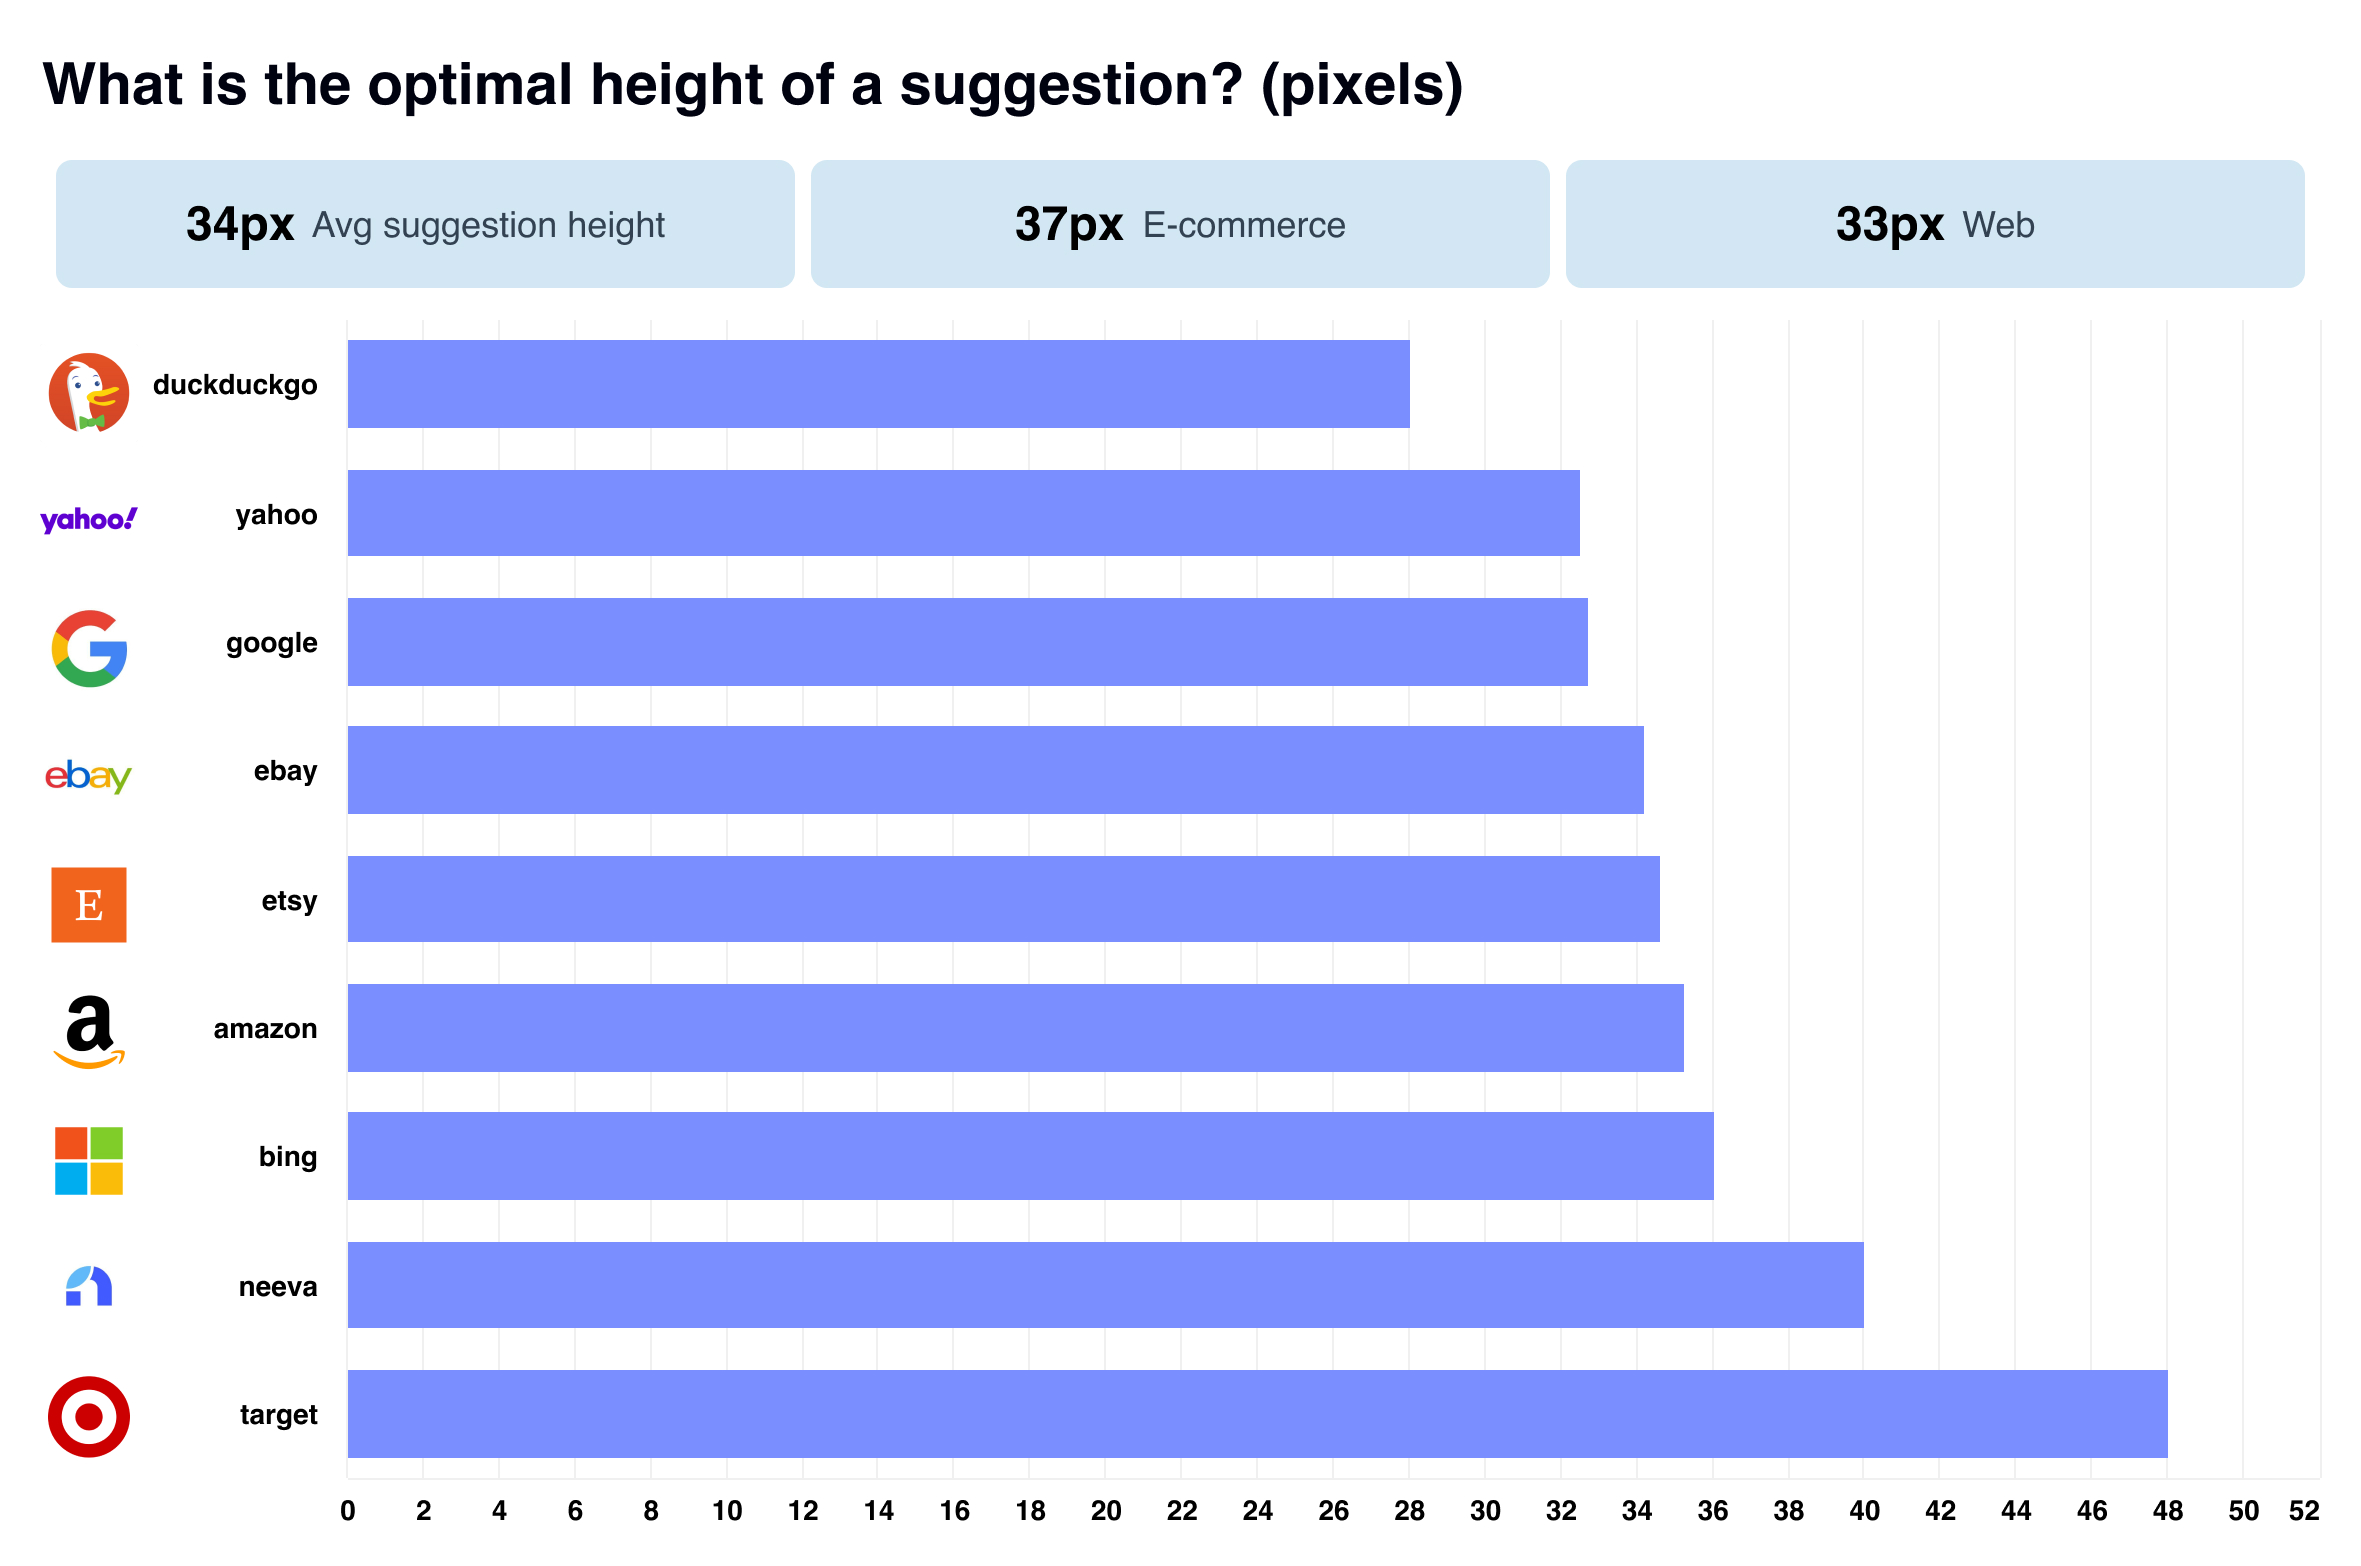 What is the optimal height of a suggestion?